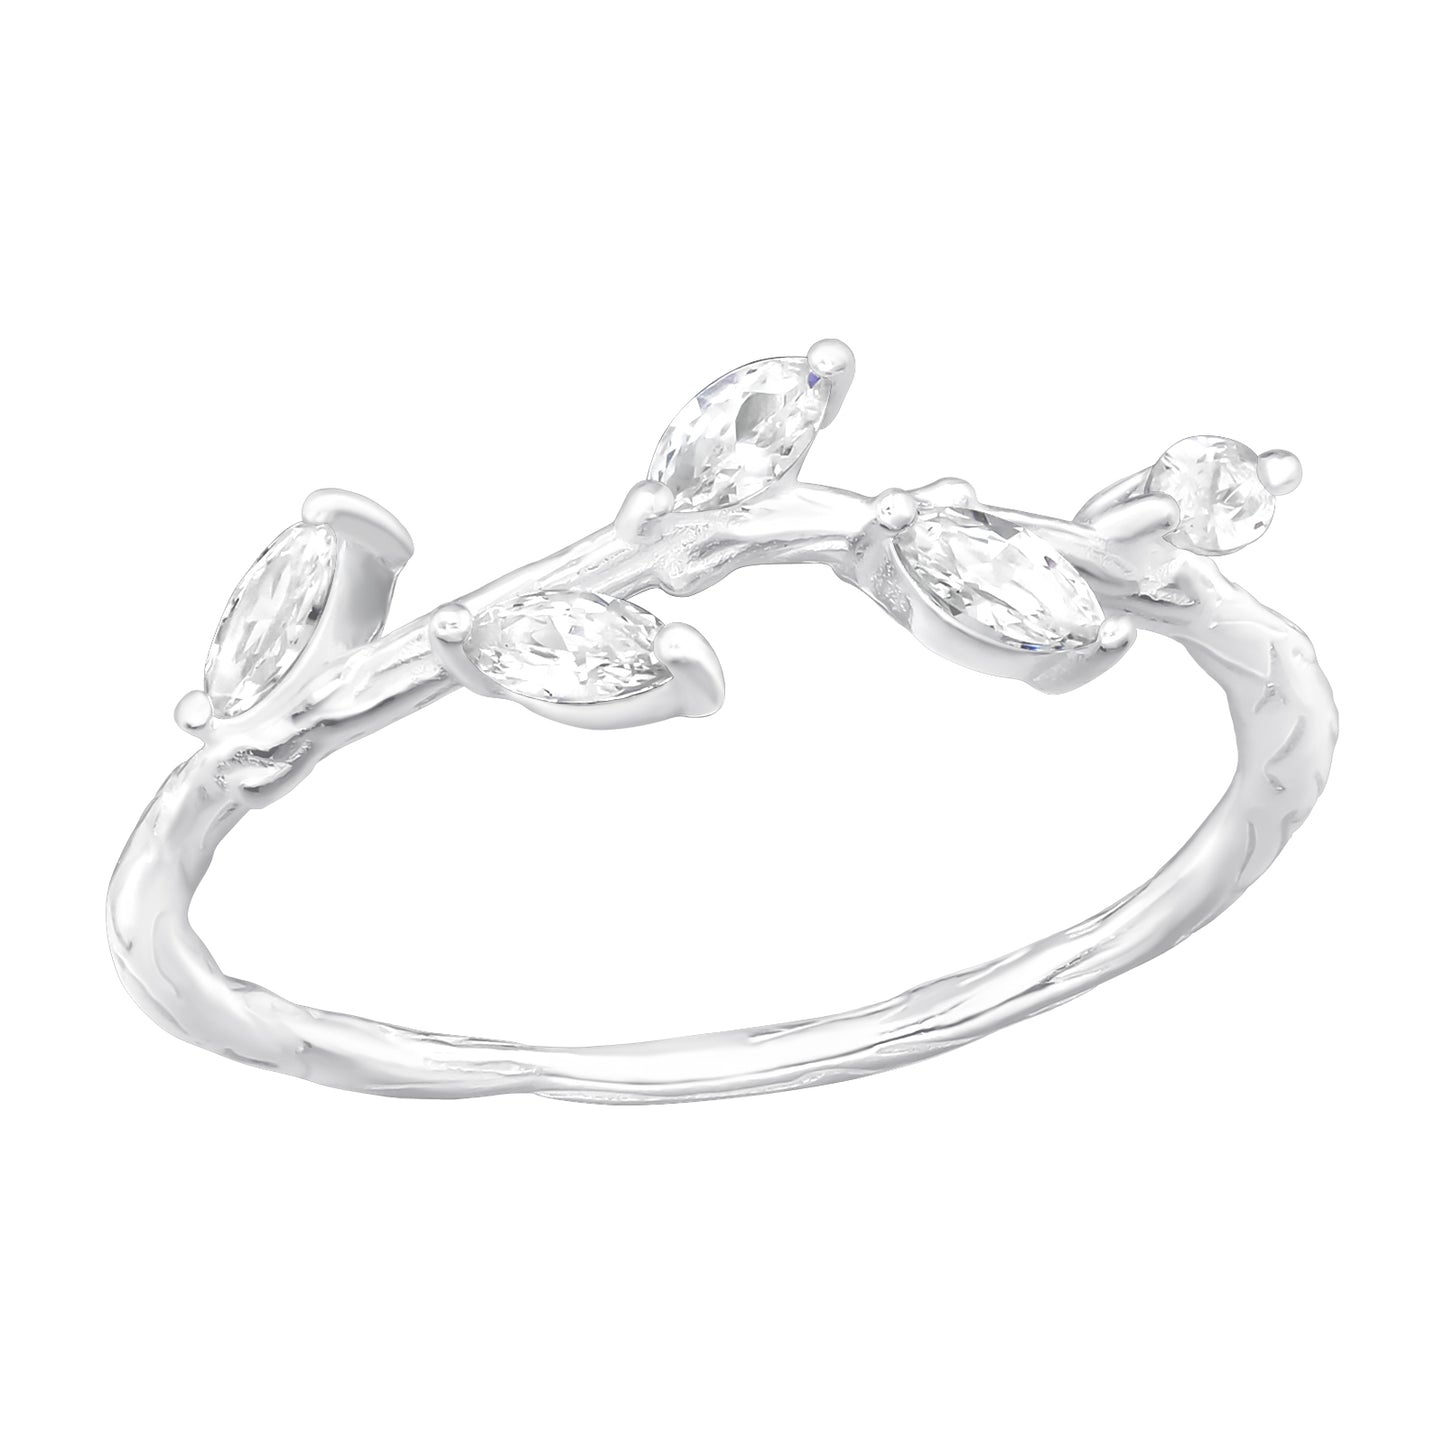 Branch Style 925 Sterling Silver Ring with CZ stones